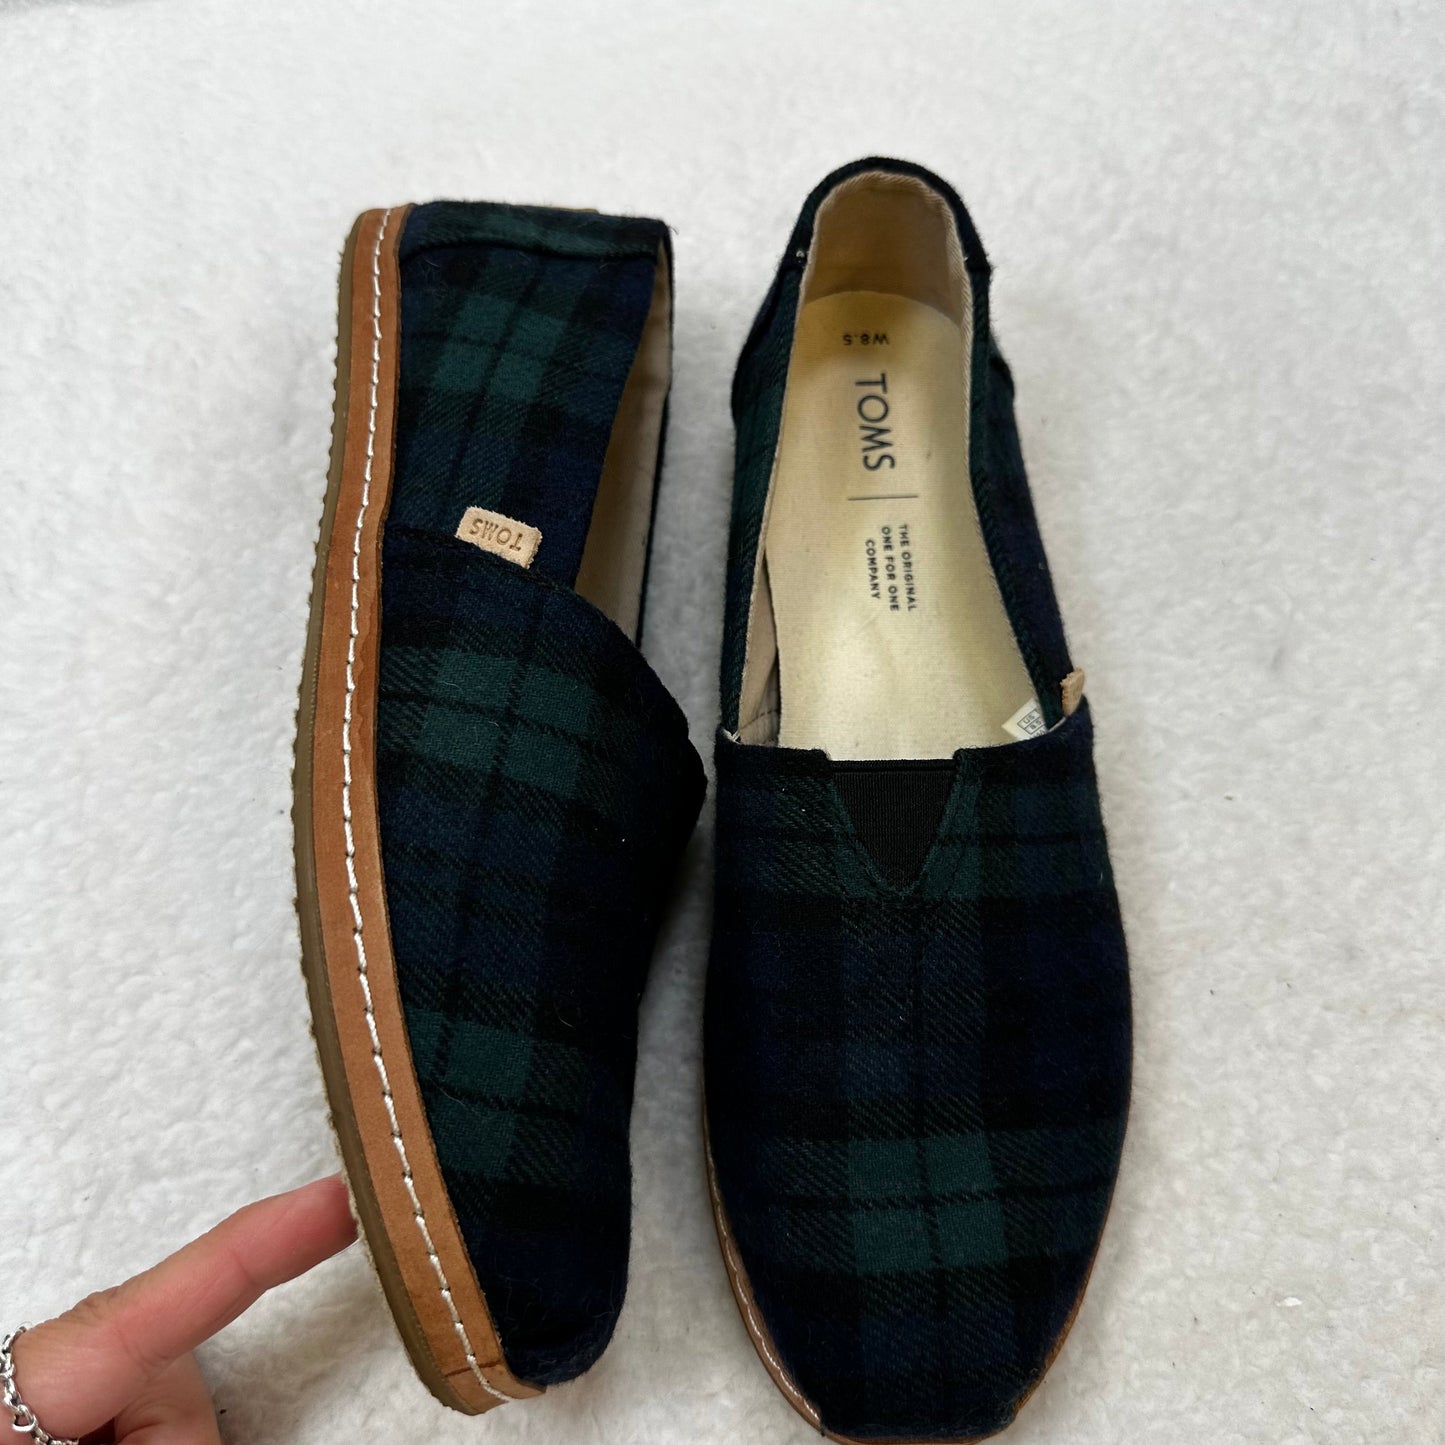 Plaid Shoes Flats Loafer Oxford Toms, Size 8.5